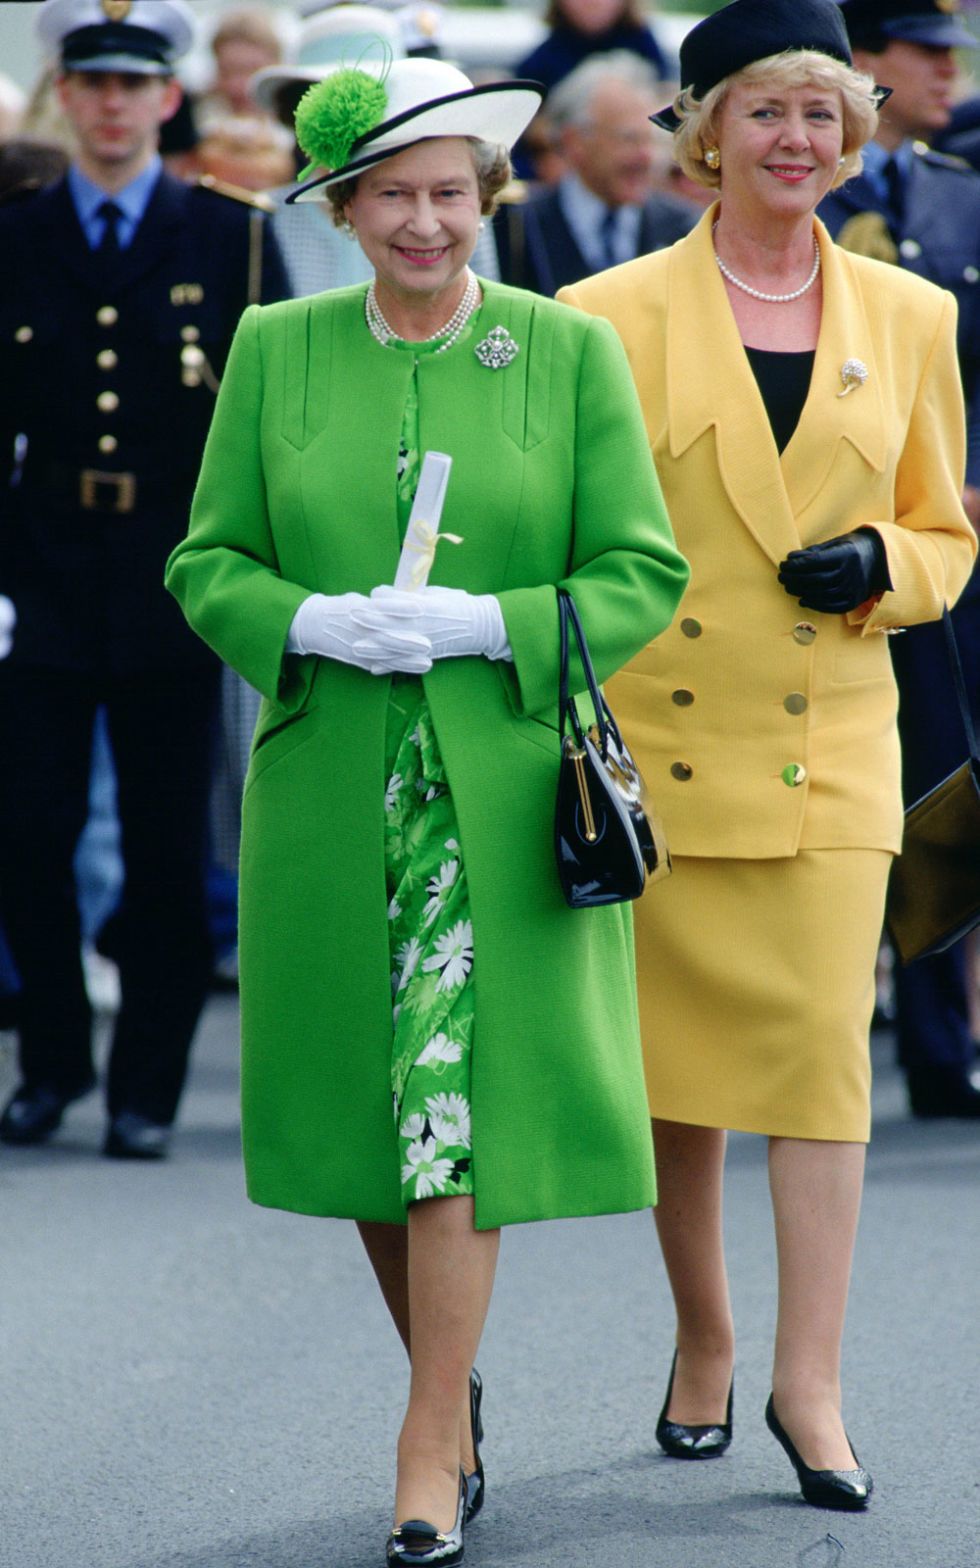 Green, Fashion, Outerwear, Yellow, Street fashion, Uniform, Event, Coat, Overcoat, Suit, 